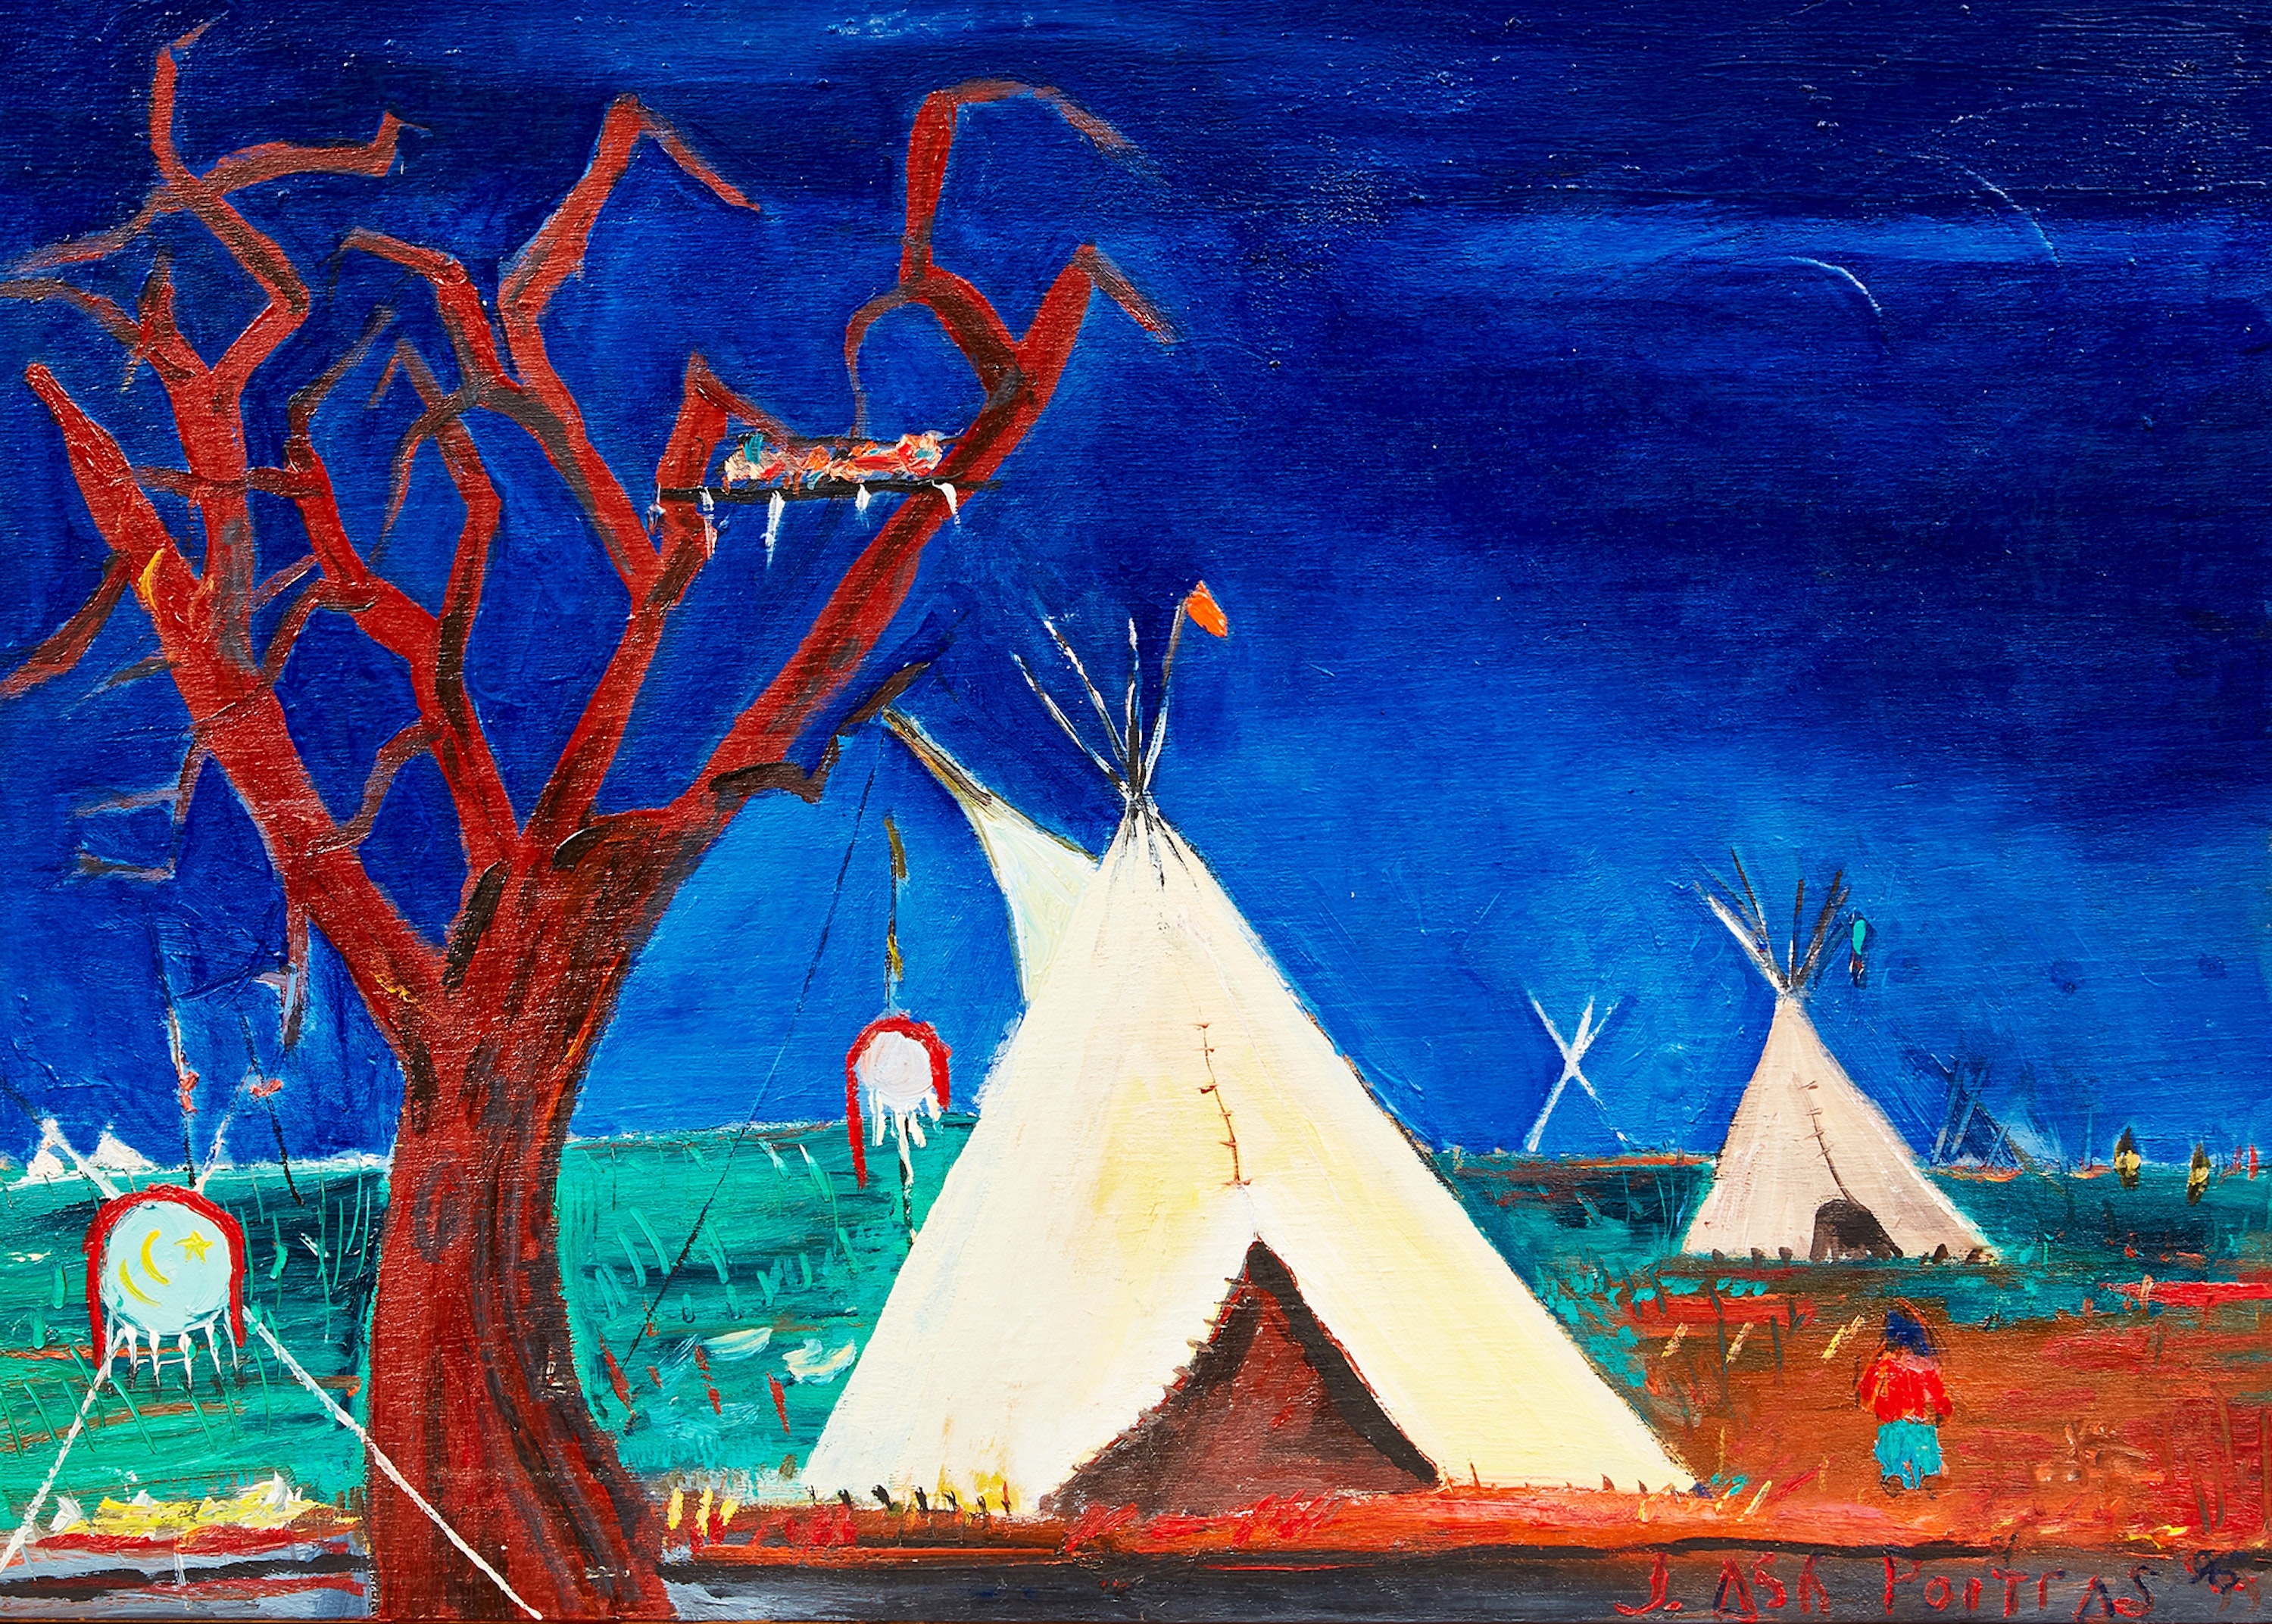 Artwork by Jane Ash Poitras, Teepees and Tree, Made of acrylic on board